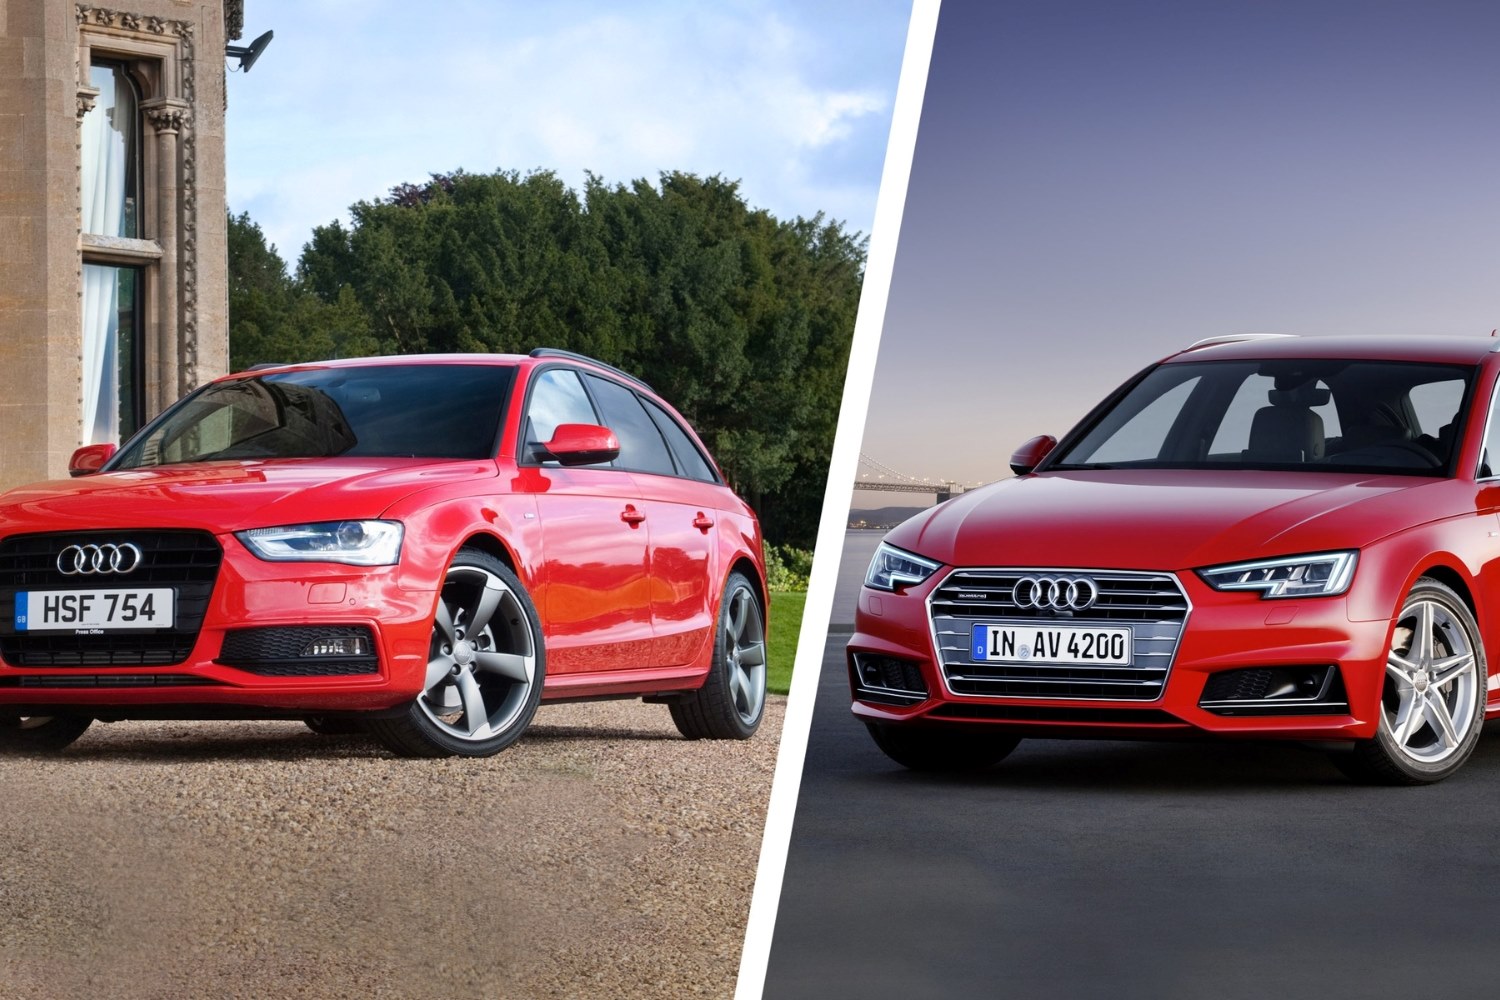 2010 Vs 2012 Audi A4: Which Is The Better Buy? Pros And Cons Revealed!